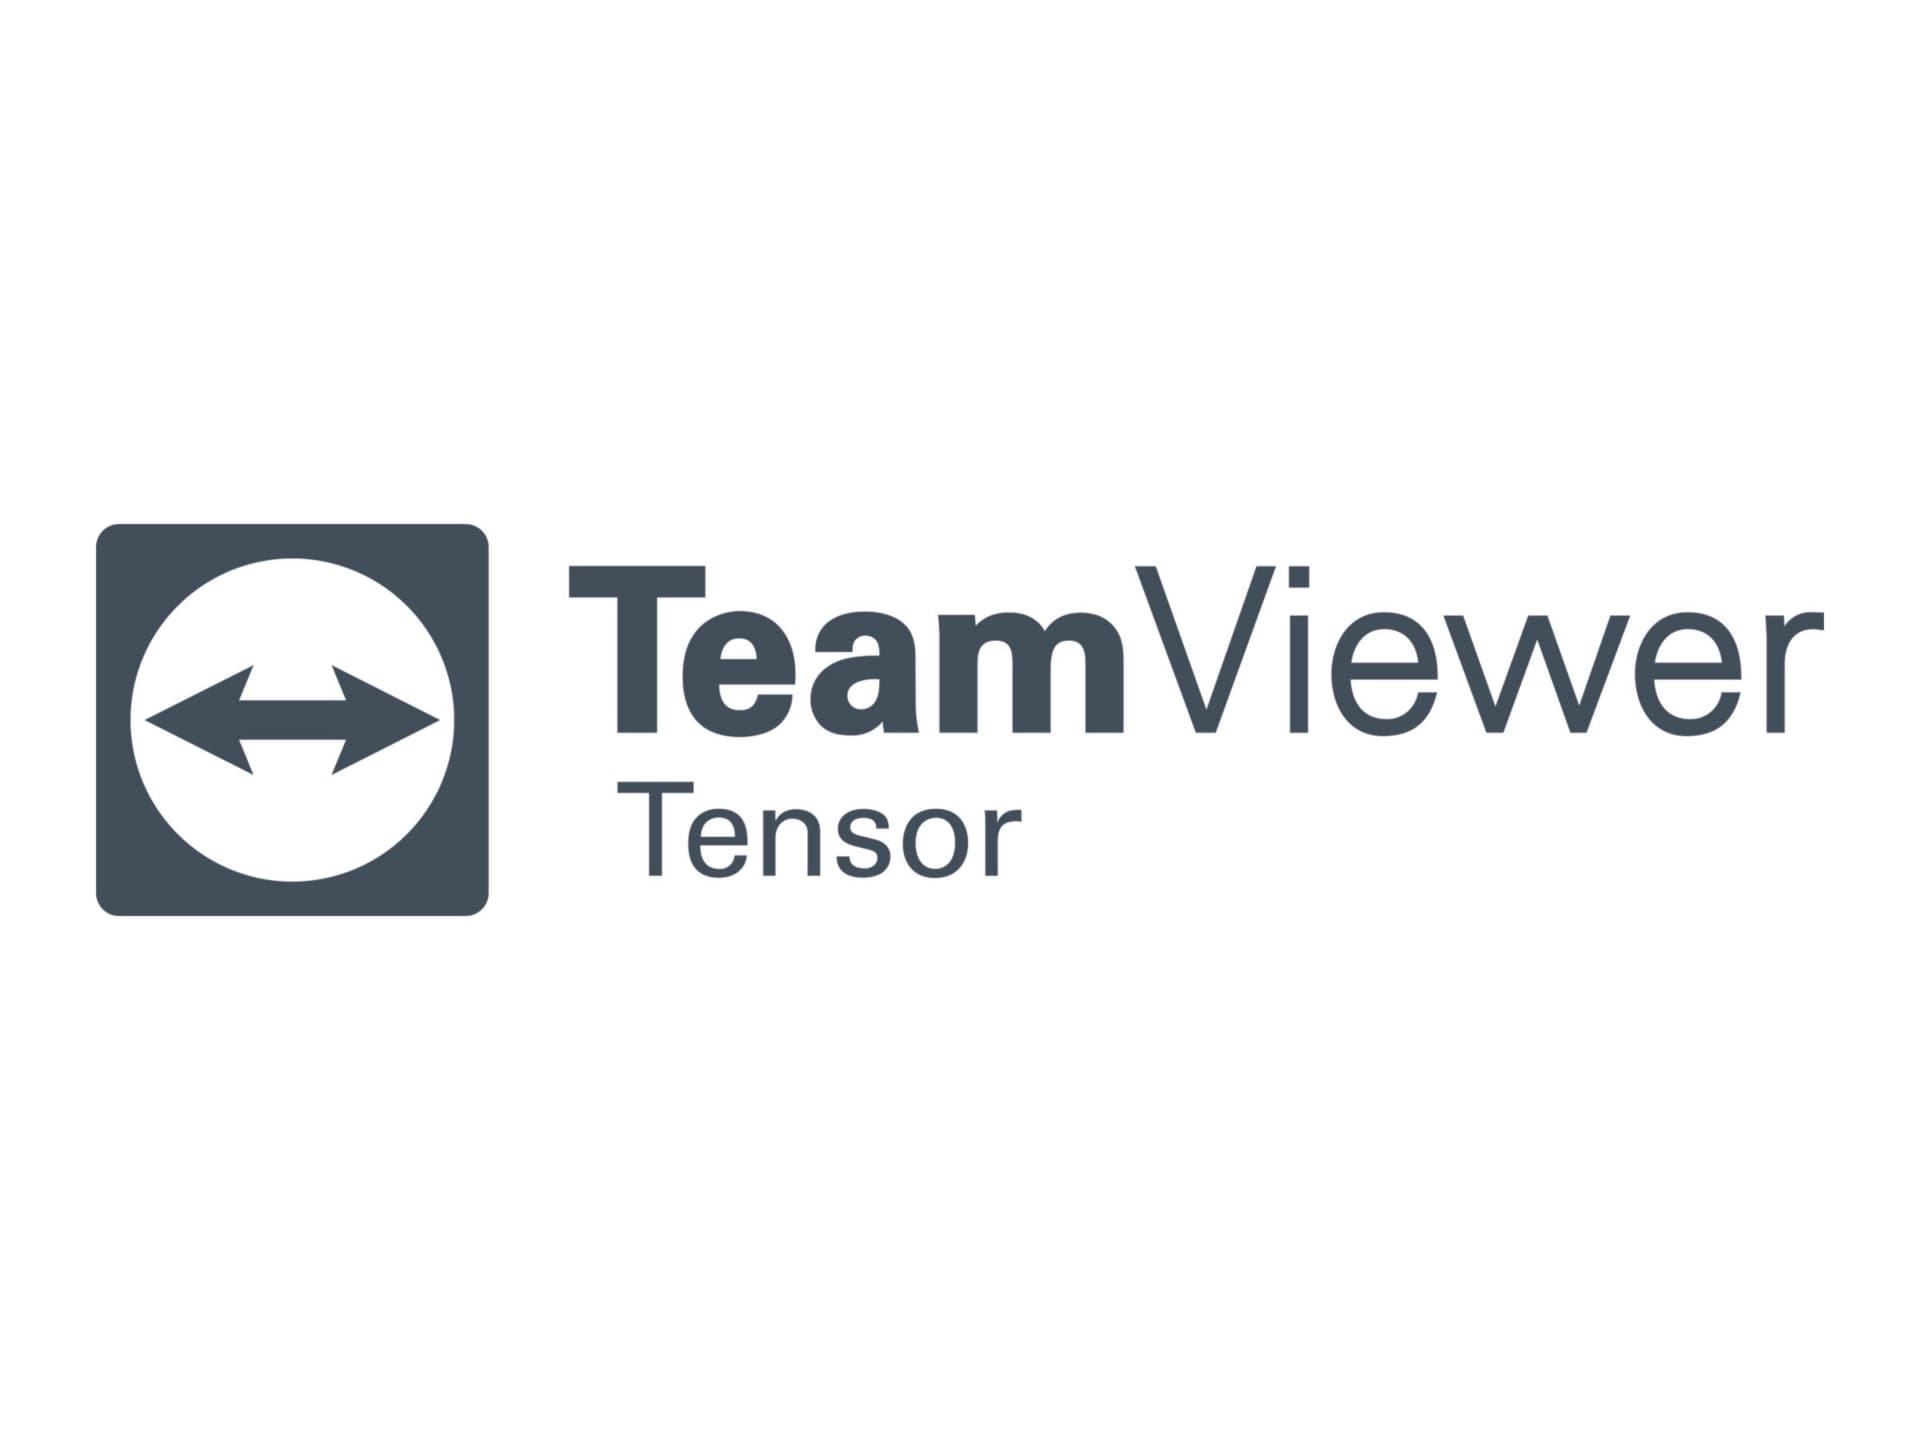 TeamViewer Tensor Basic - subscription license (1 year) - 1 license